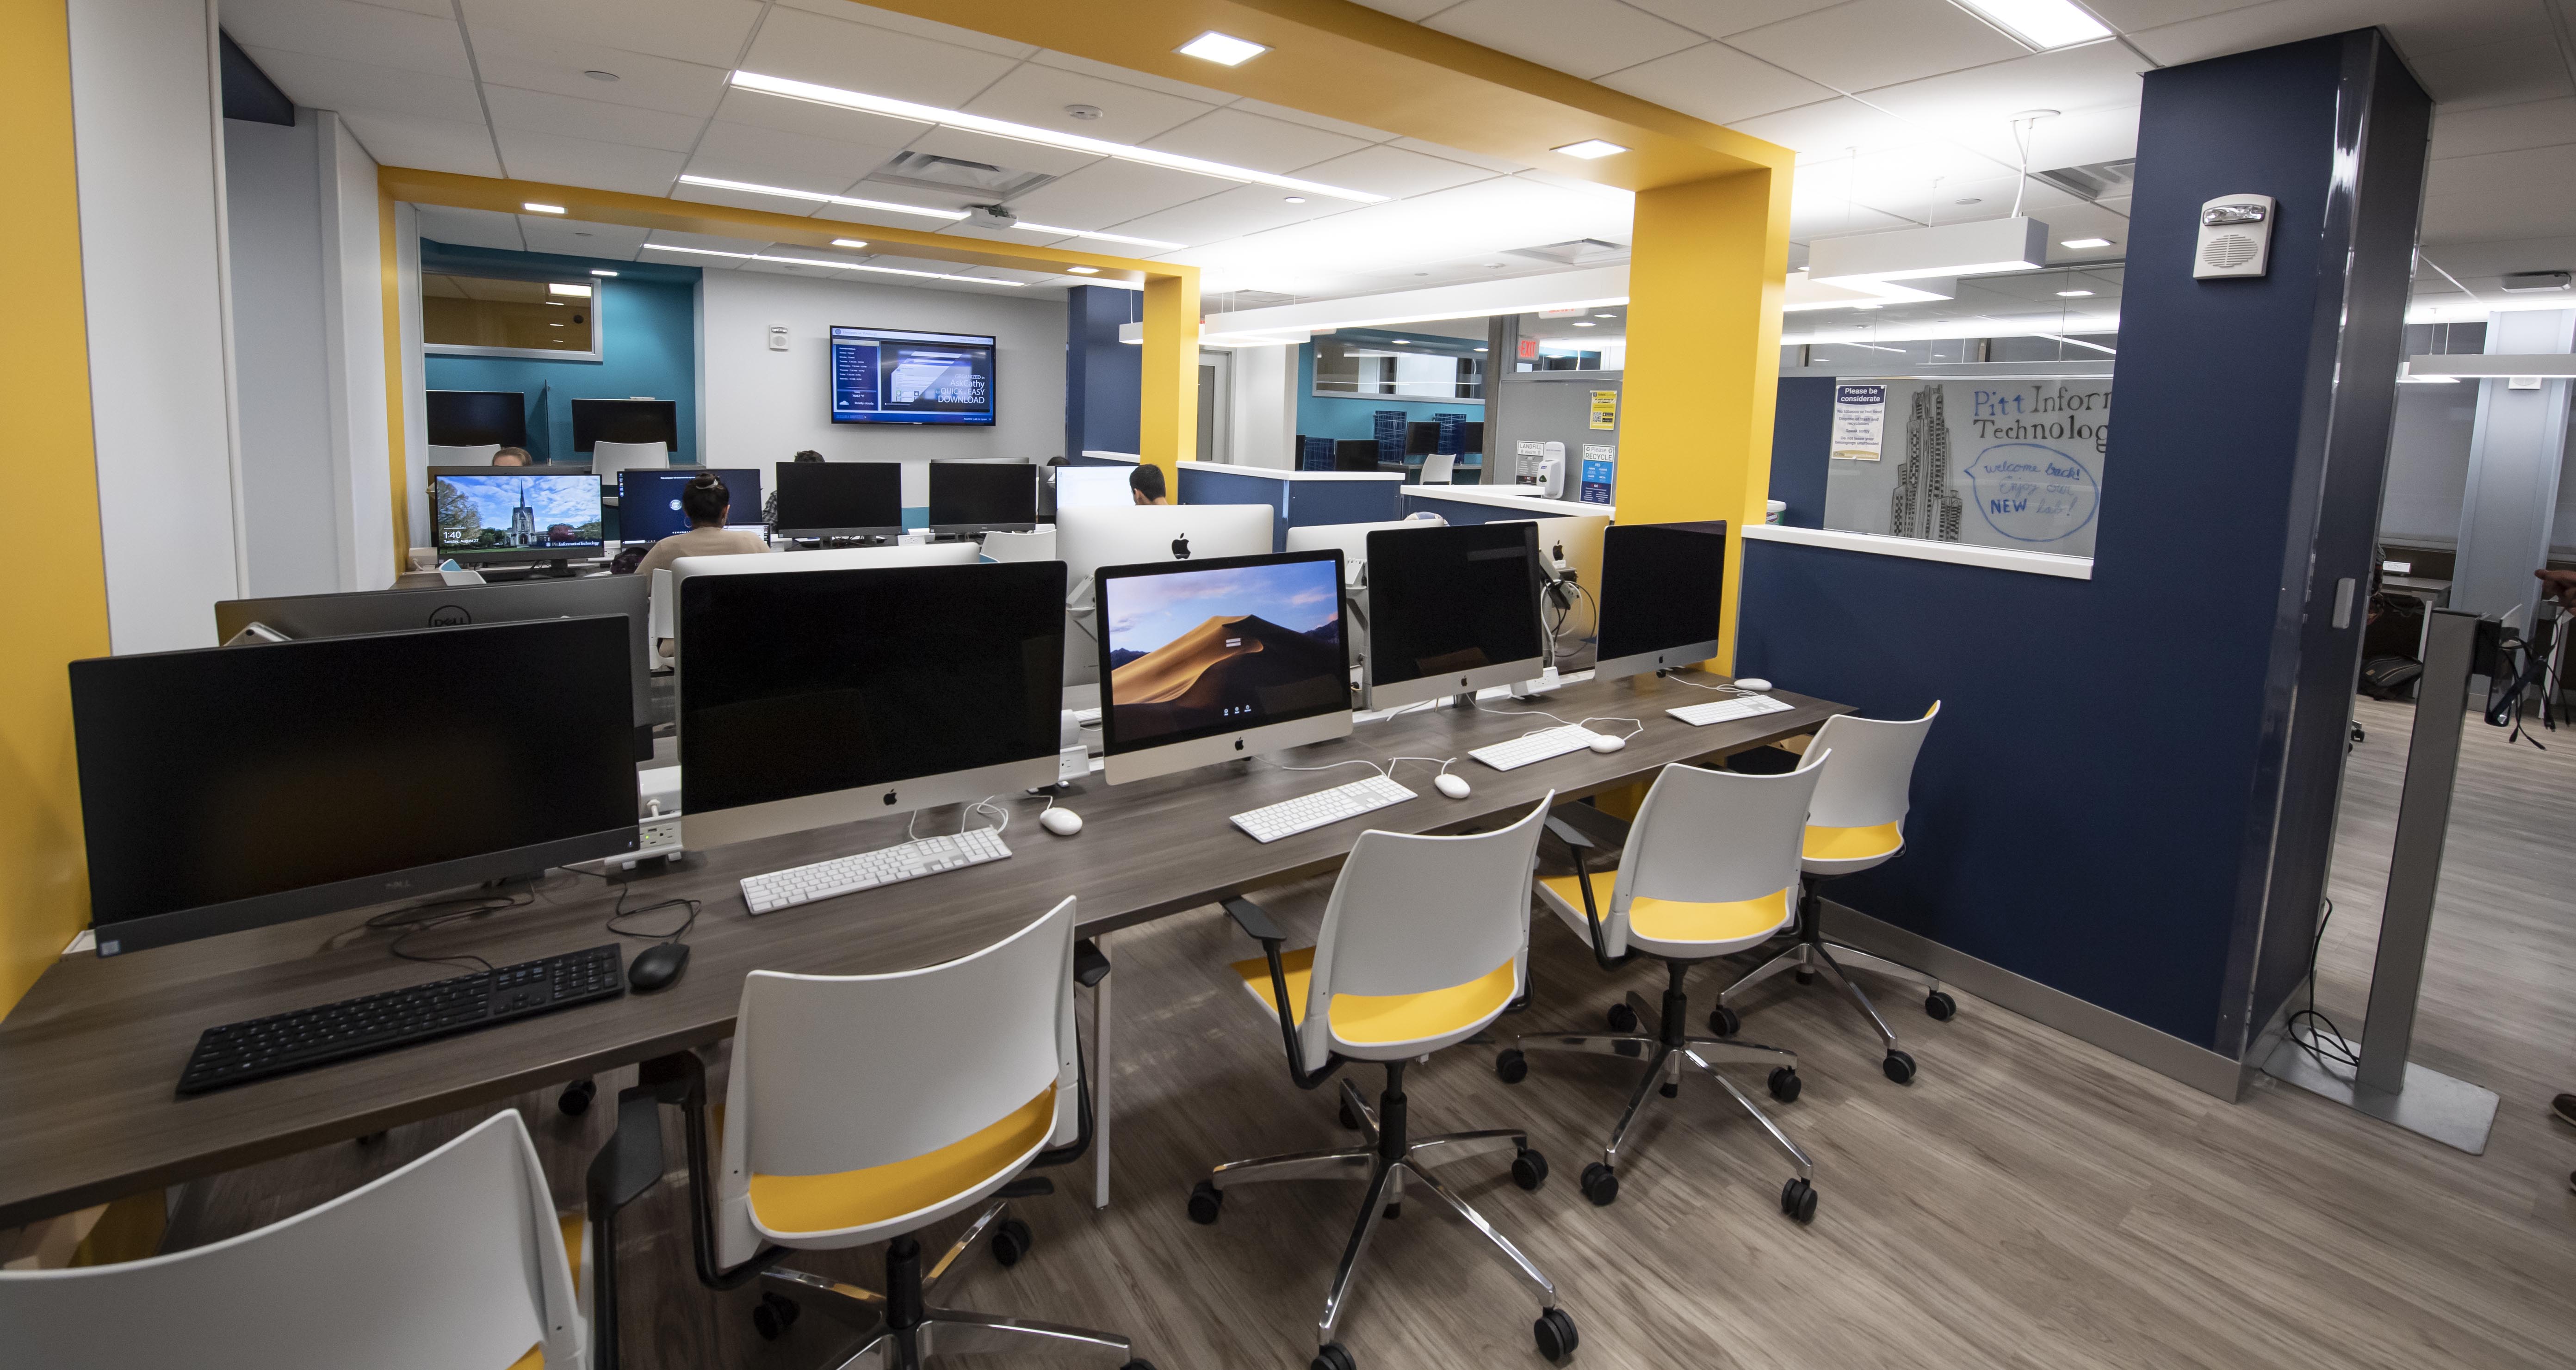 What’s new Facilities work brings updates across campus University